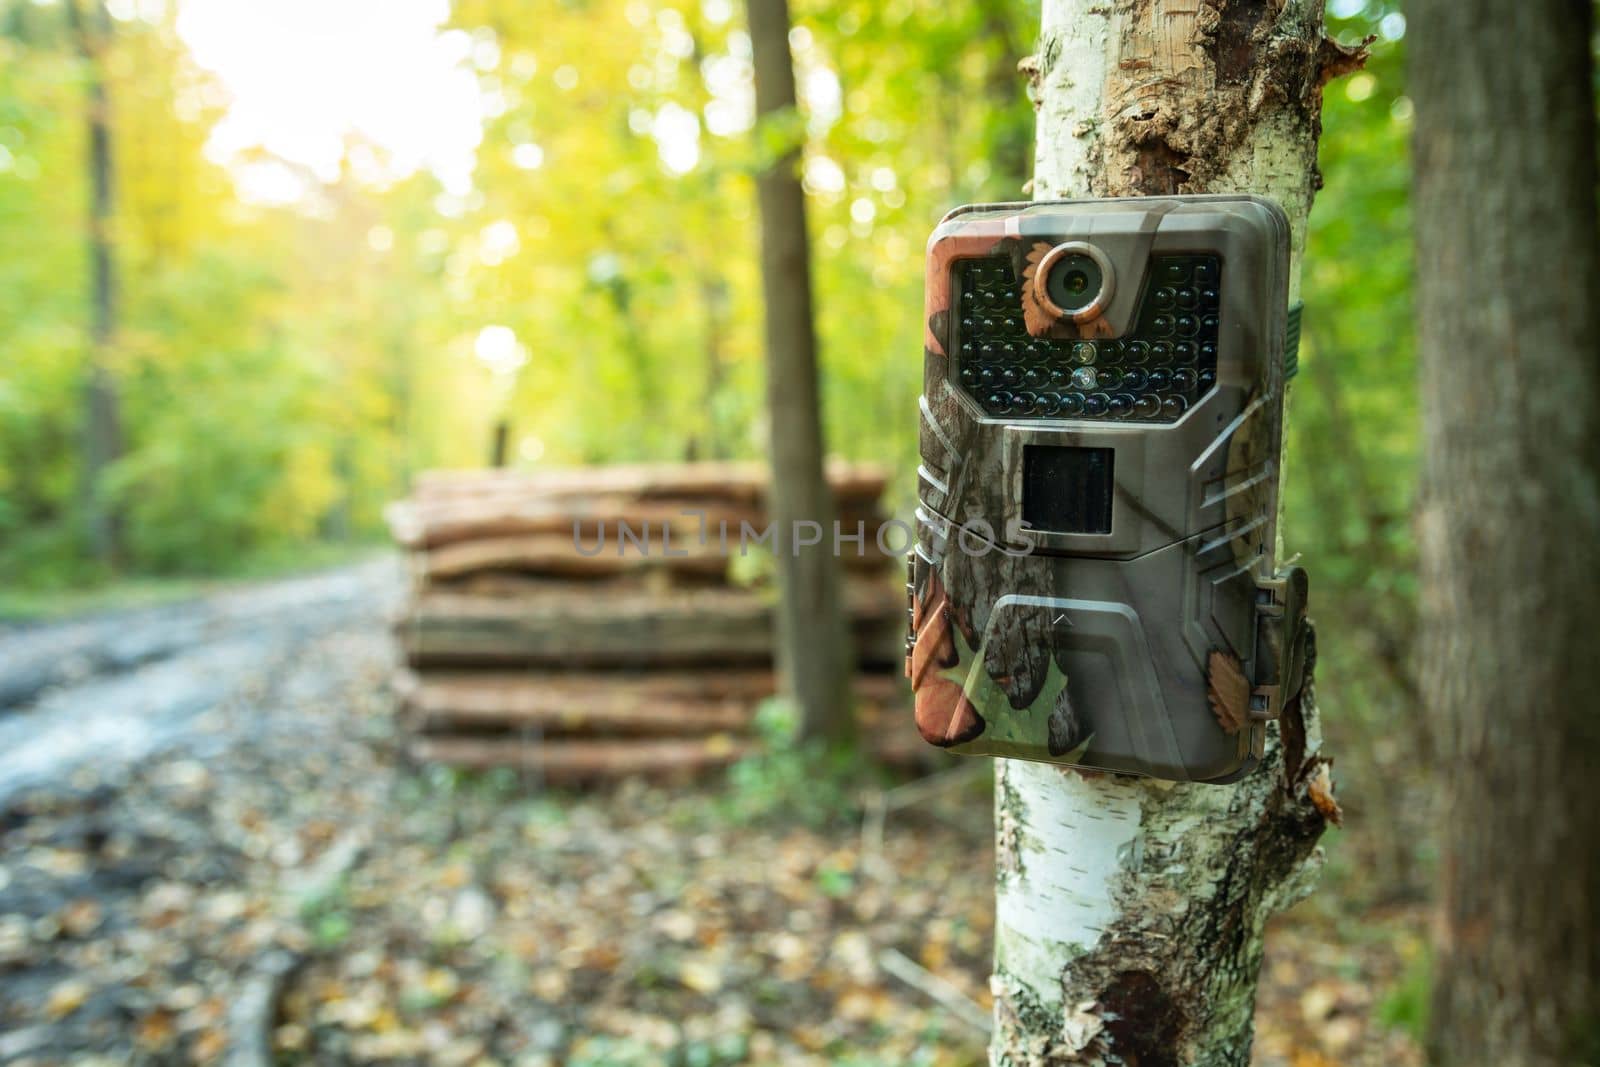 Camera trap mounted on a tree in the forest, October day view